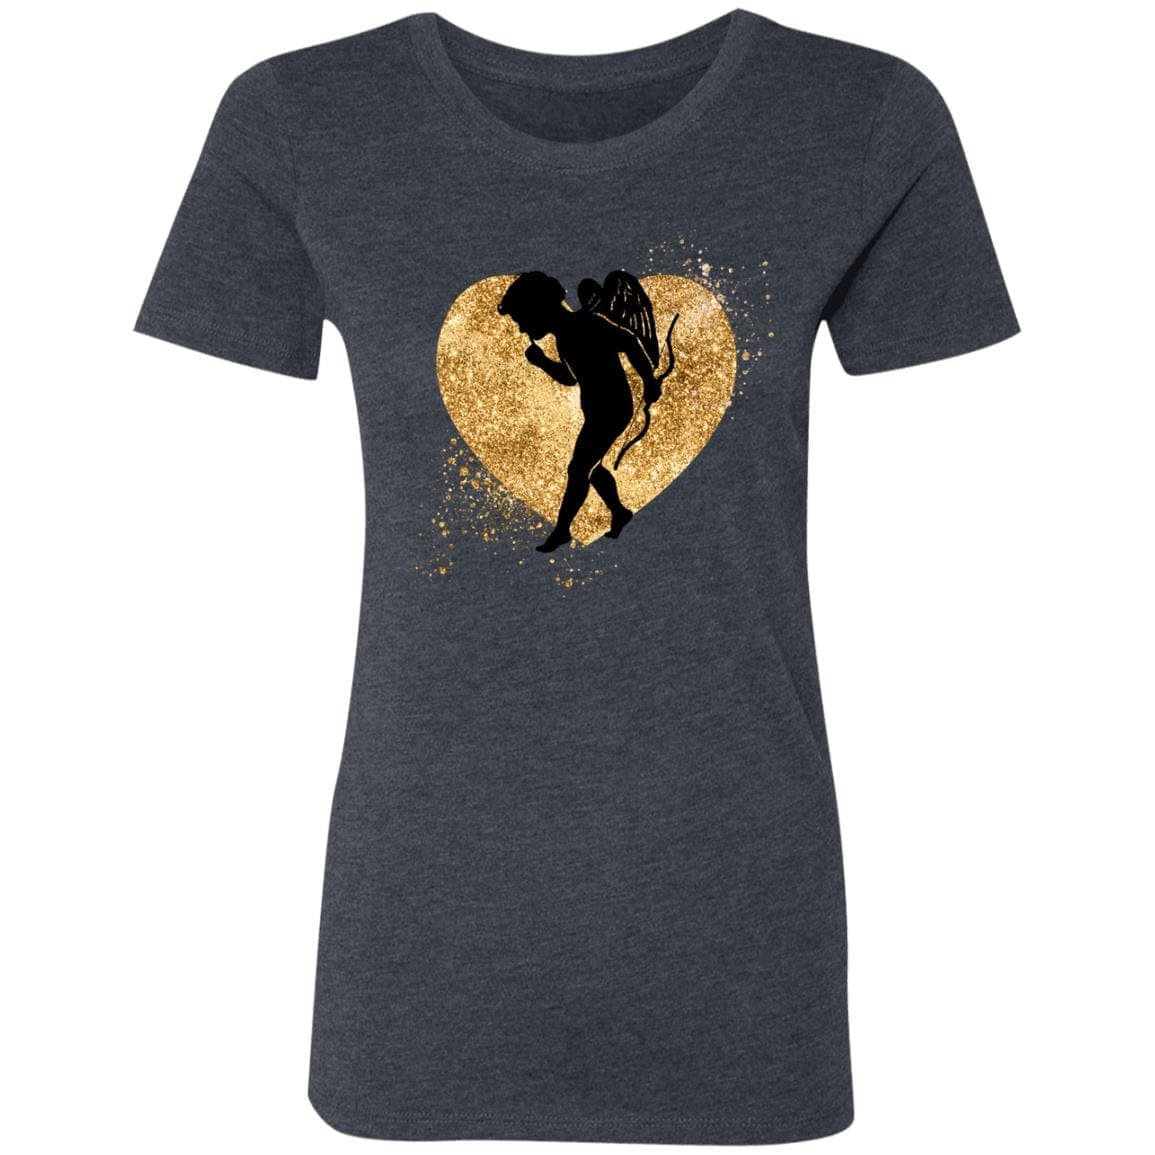 Cupid and the golden heart, Ladies' Triblend T-Shirt